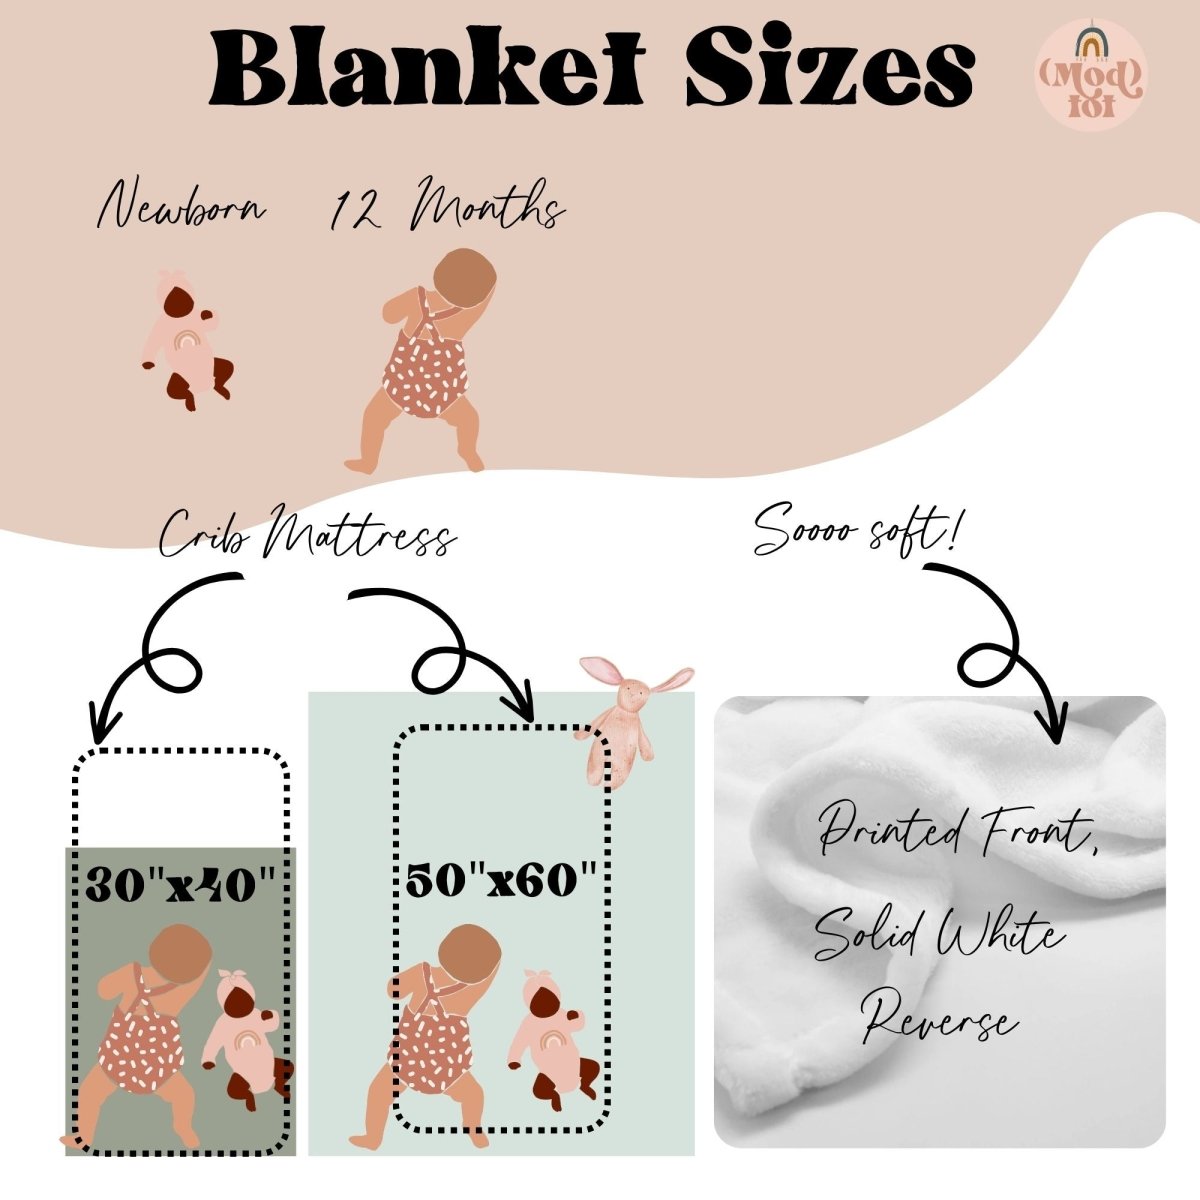 Butterfly Floral Personalized Minky Blanket - Butterfly Floral, gender_girl, Personalized_Yes